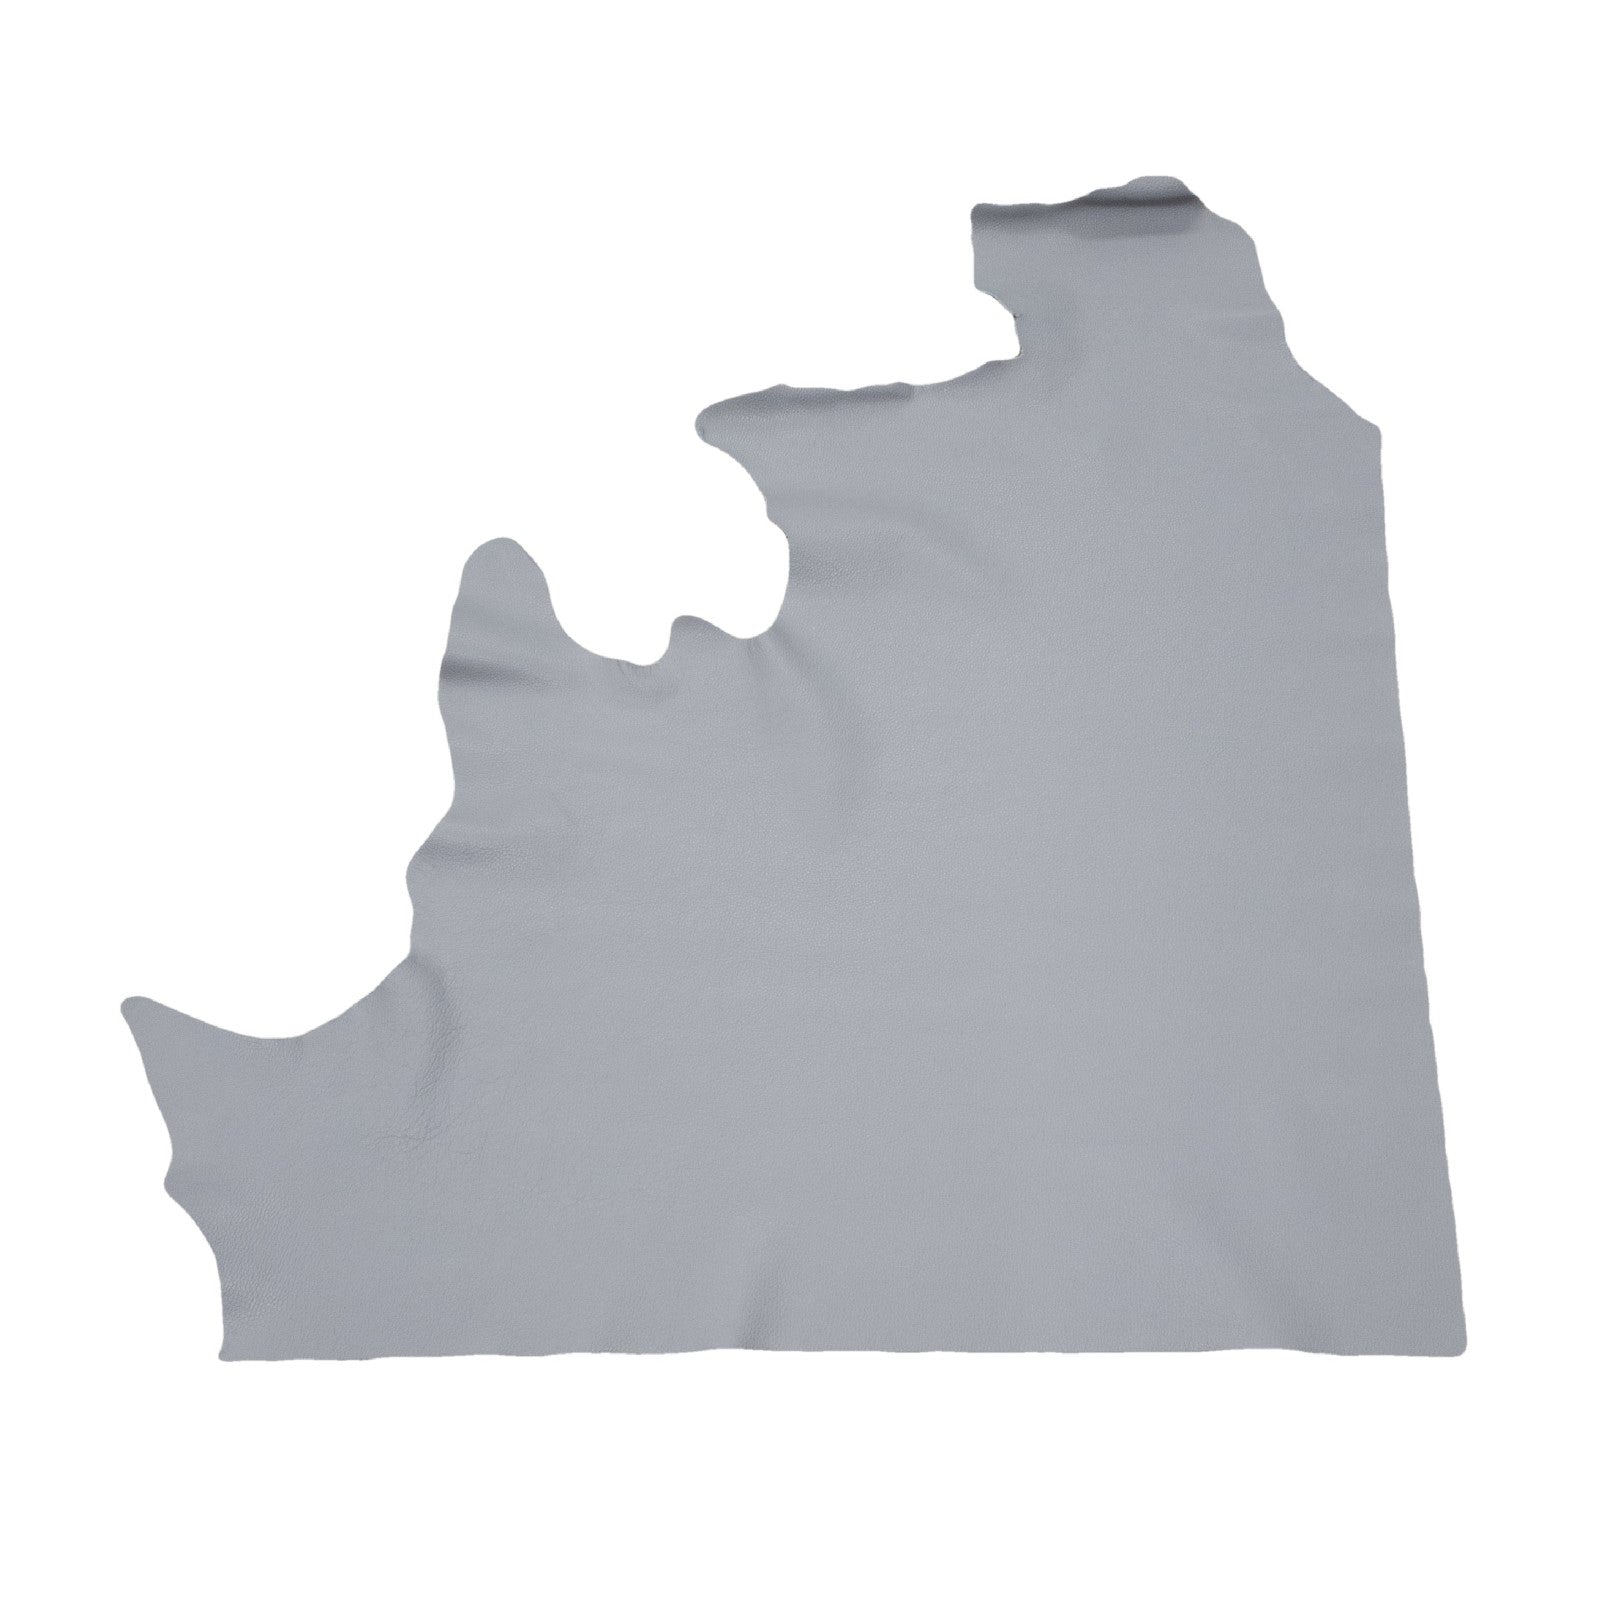 Pittsburgh Steel Gray Tried n True 3-4 oz Leather Cow Hides, 6.5-7.5 Square Foot / Project Piece (Top) | The Leather Guy